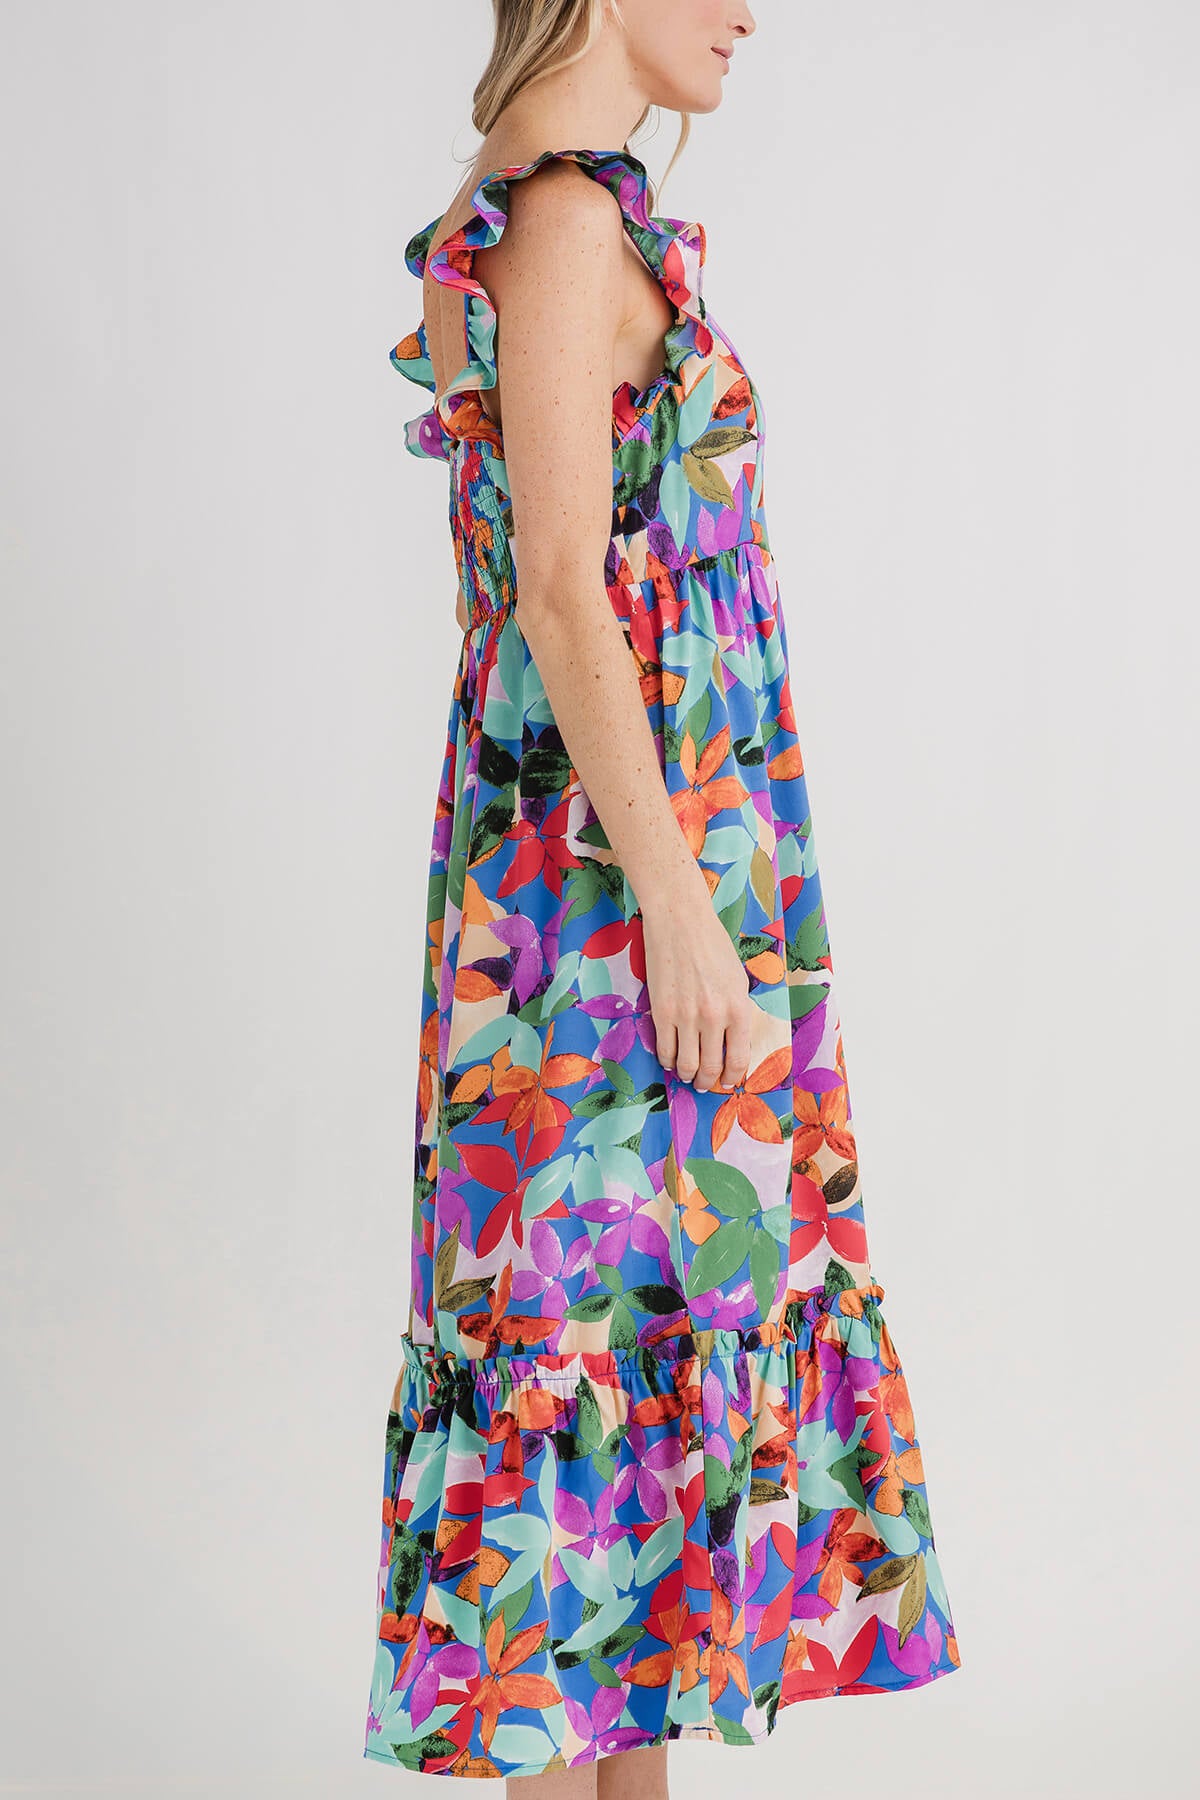 Eesome Floral Print Square Neck Dress